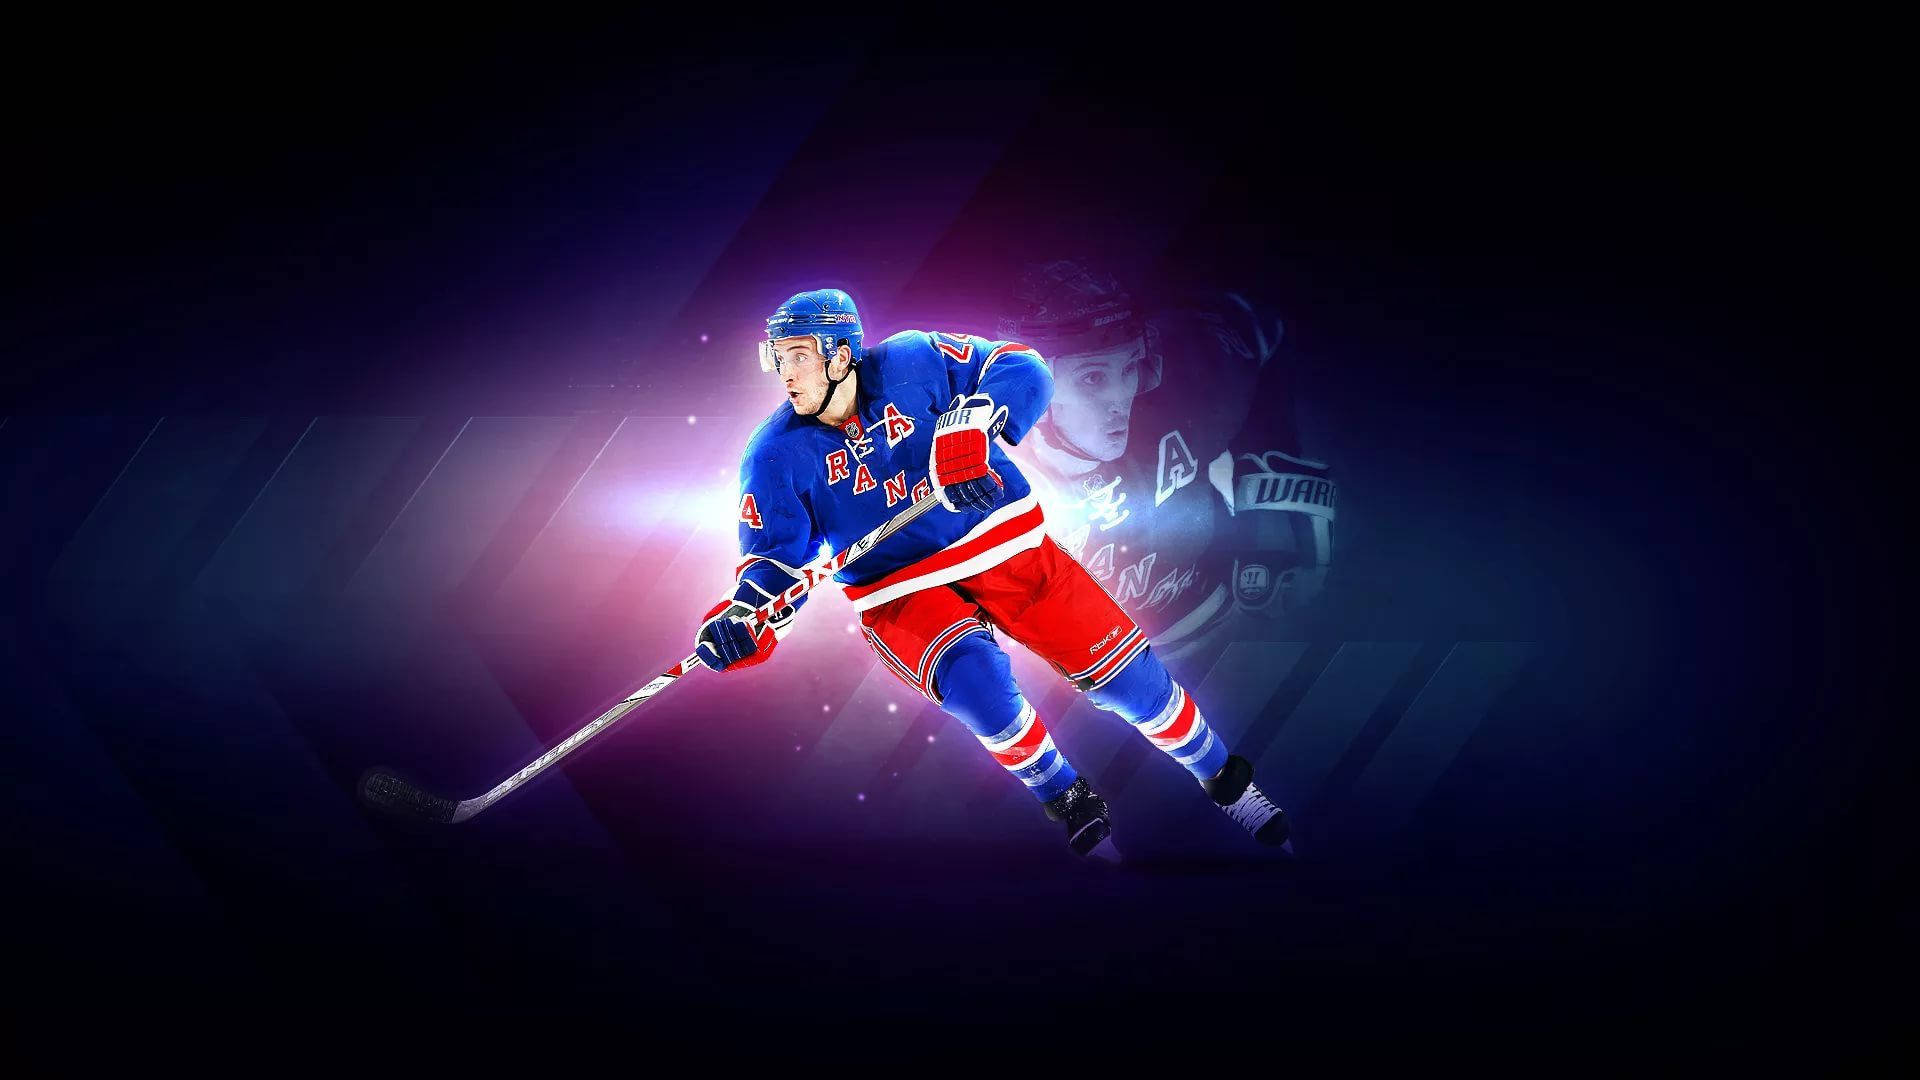 Pro hockey players in action Wallpaper